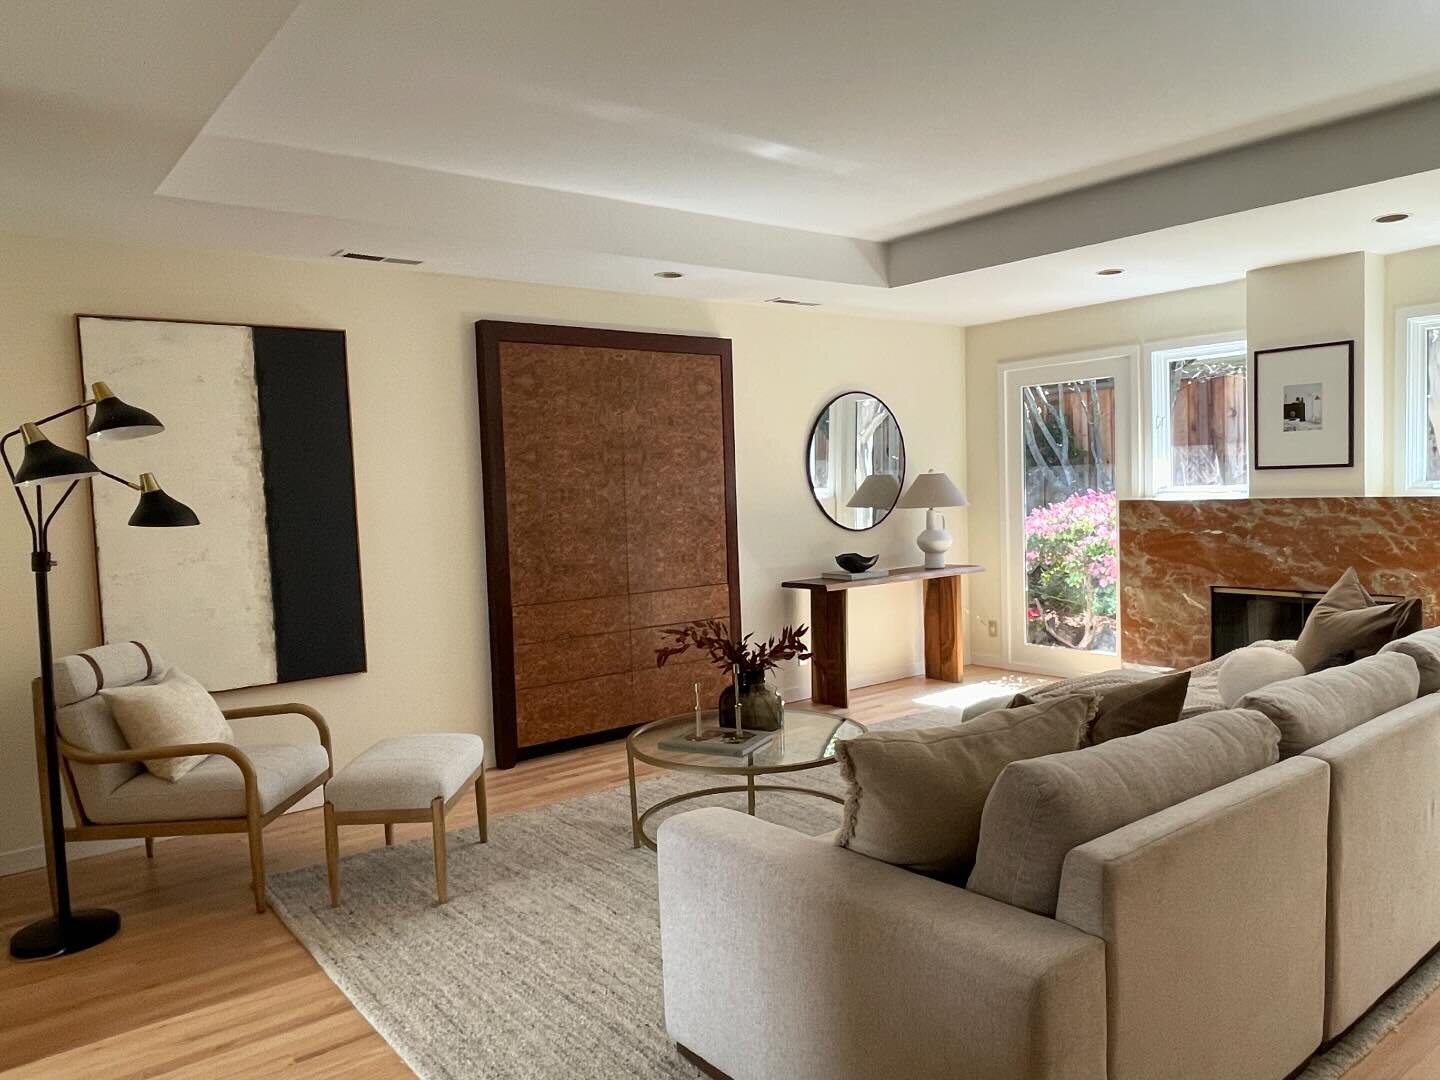 The moment when all the details come together. Coming soon 

#bayarearealestate #siliconvalleyrealestate #homestaging #livingroom #interiordesign #thekinhome #staging #paloaltorealestate